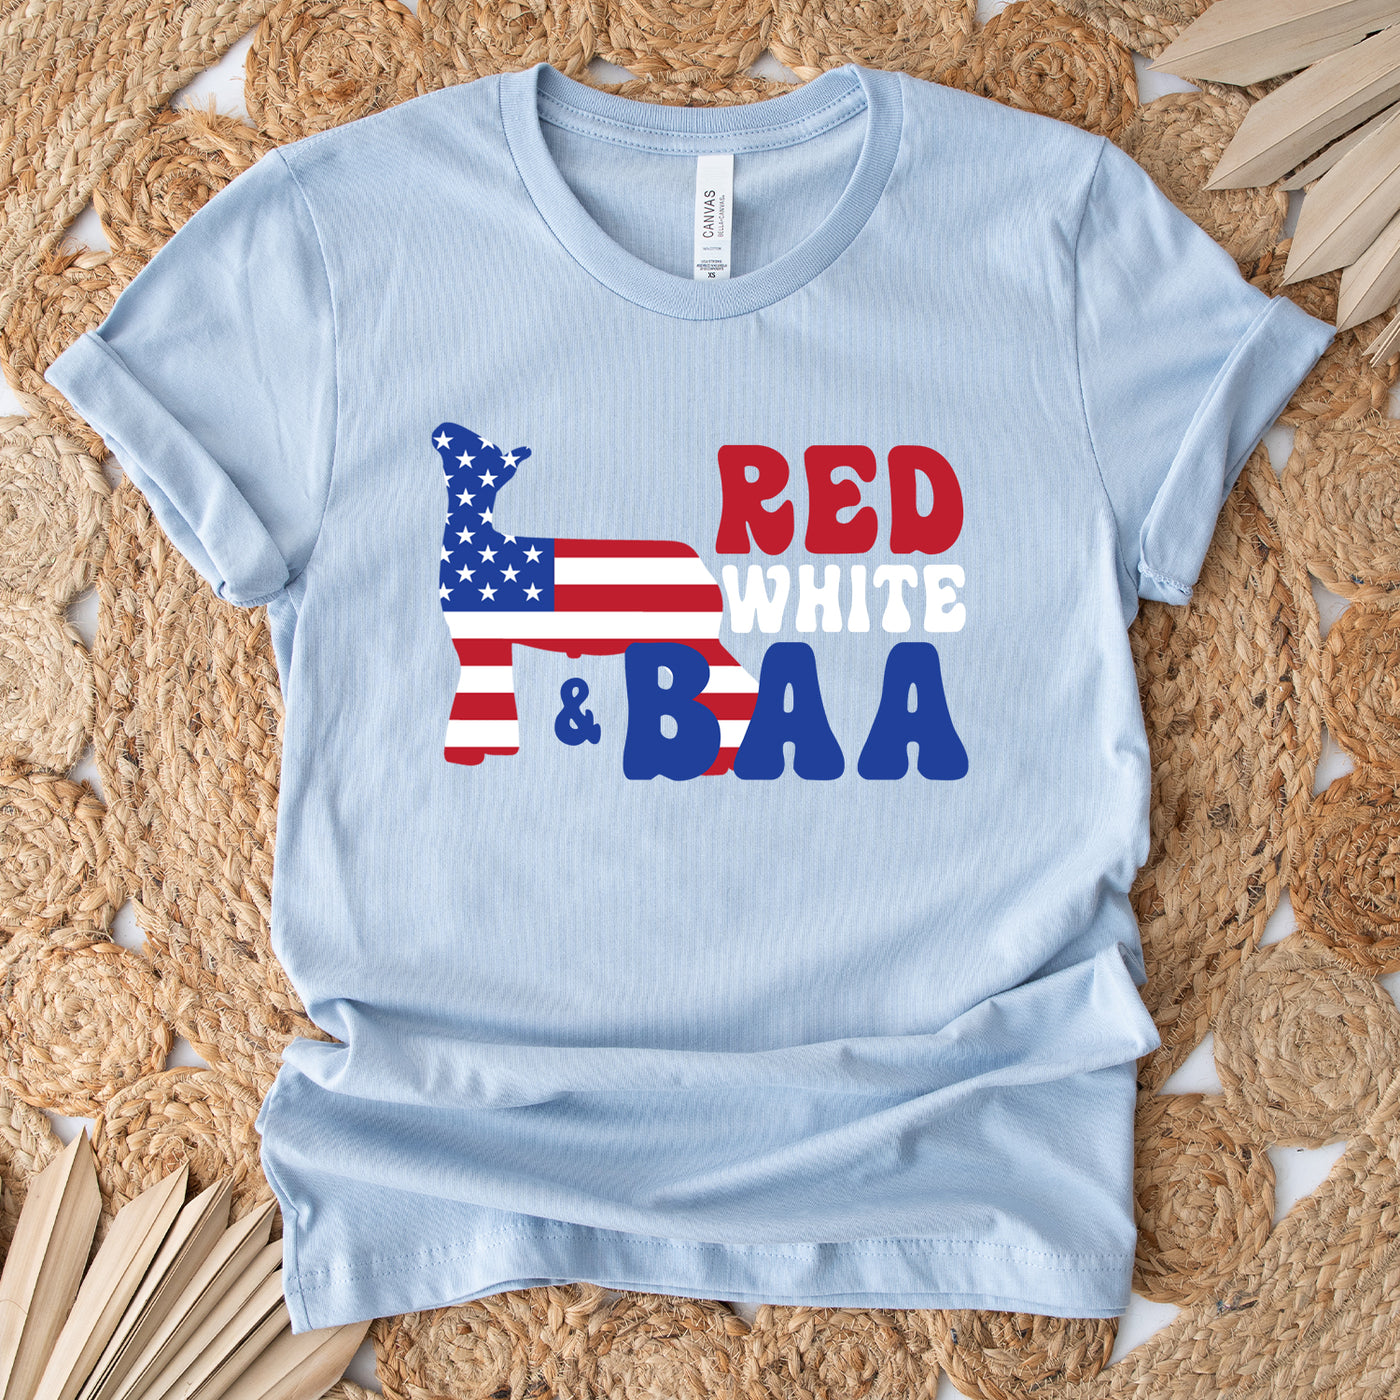 Red, White & Baa T-Shirt (XS-4XL) - Multiple Colors!